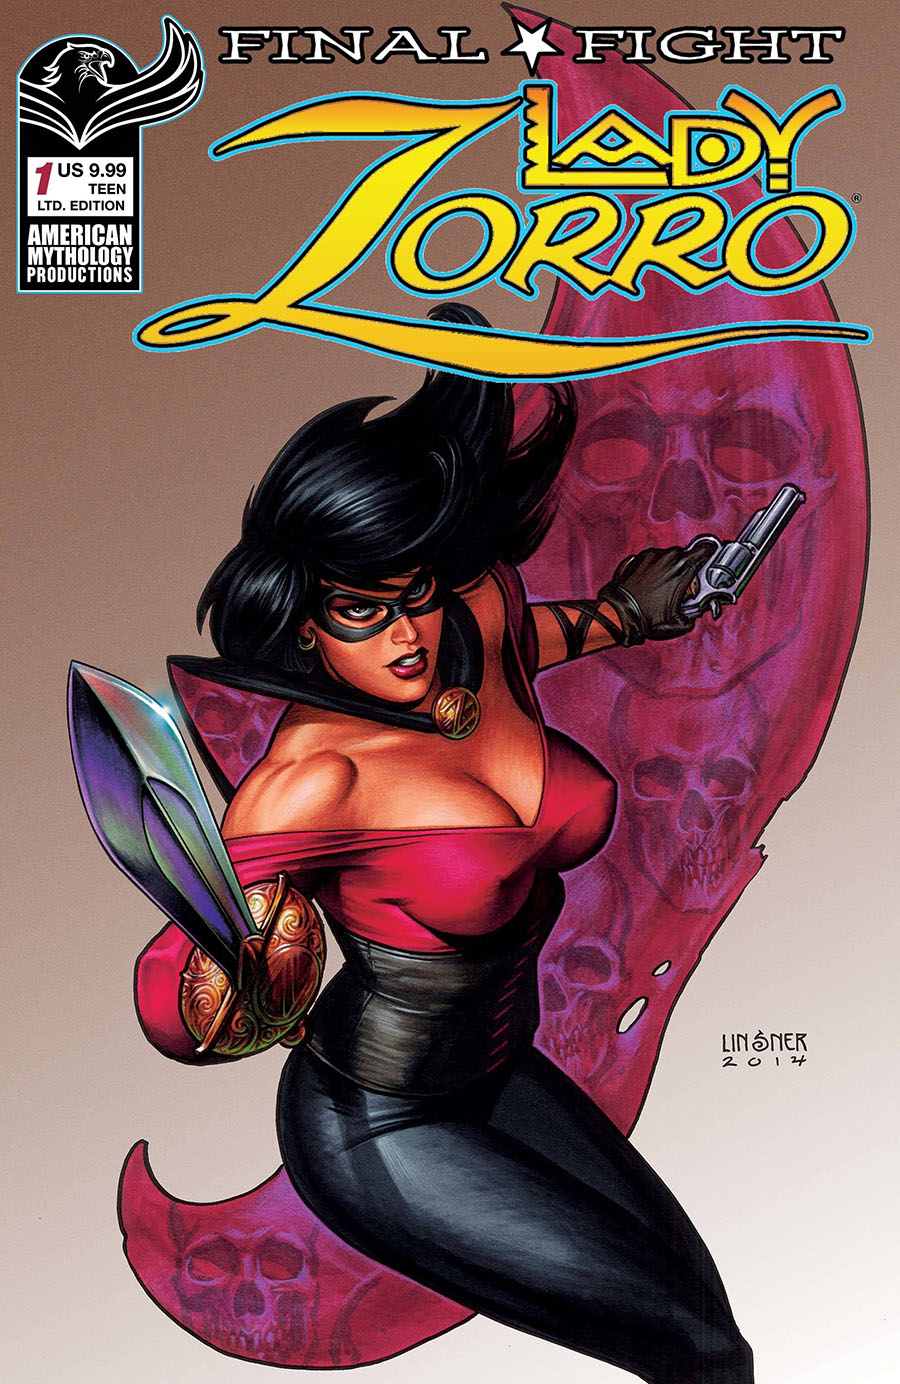 Lady Zorro Final Fight #1 Cover C Limited Edition Joseph Michael Linsner Throwback Variant Cover